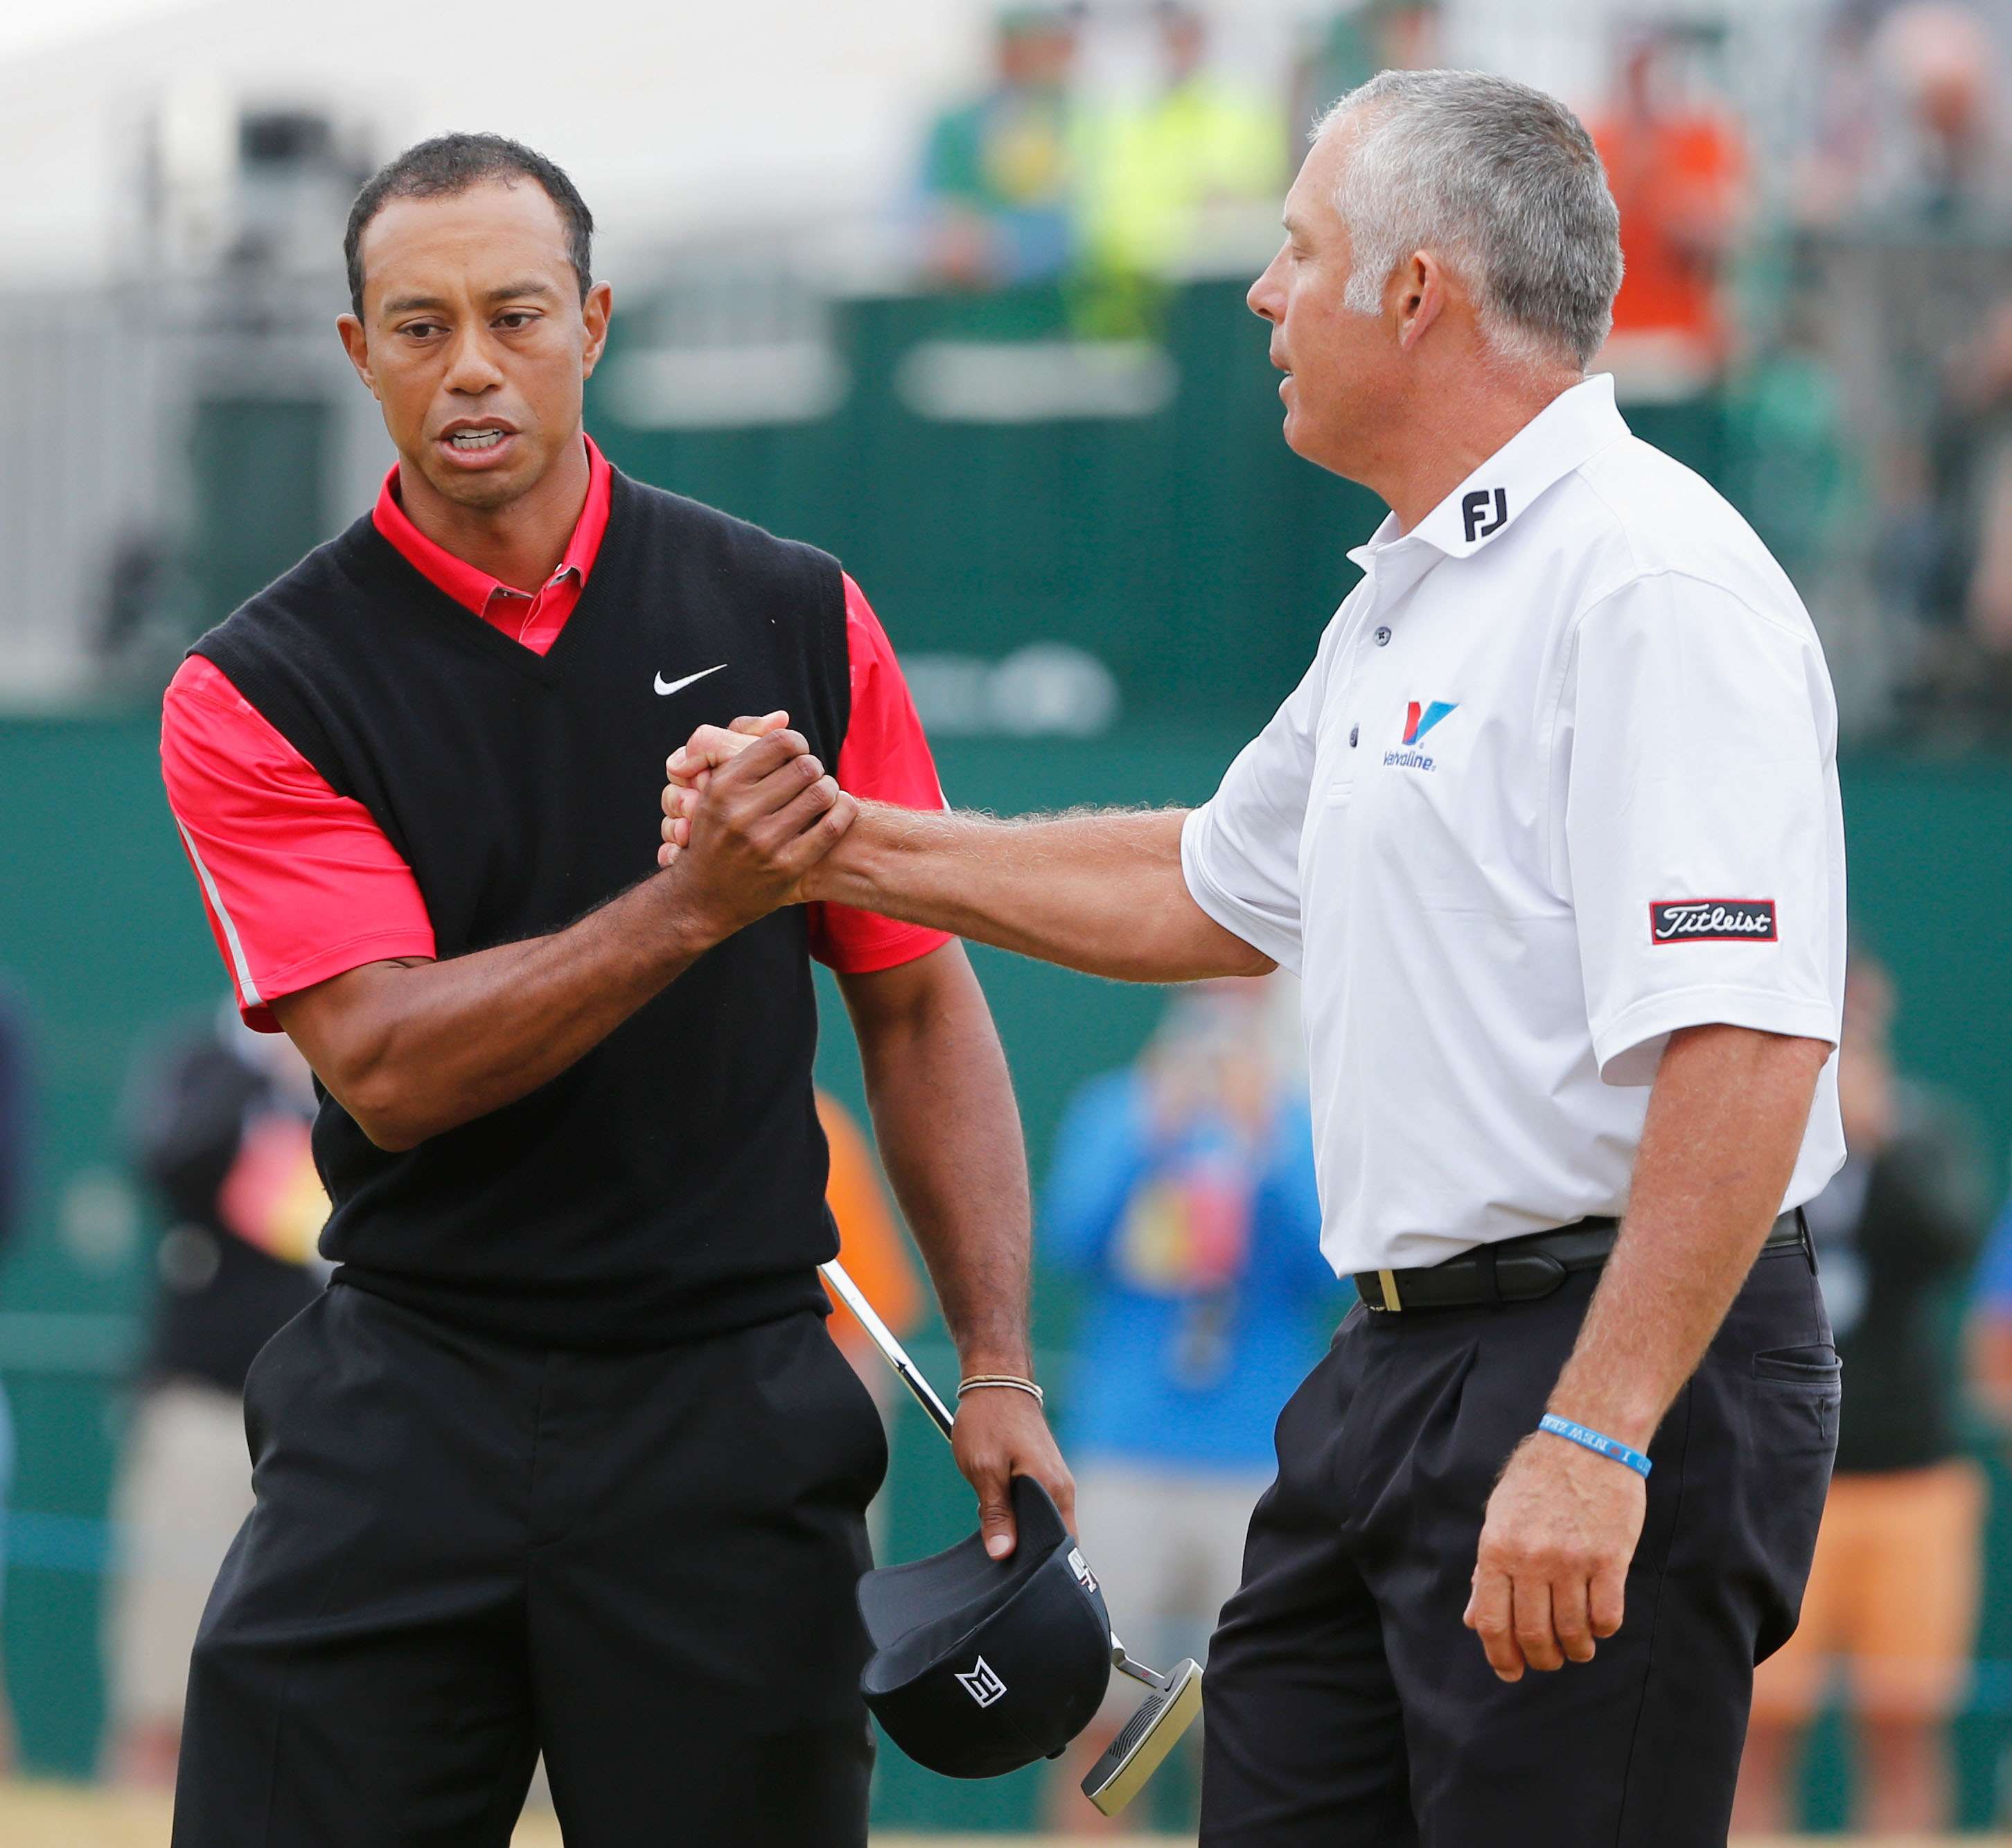 Frosty relationship: Tiger Woods and Steve Williams shake hands after the 2013 Open Championship at Muirfield (Photo by Rob Carr/Getty Images)